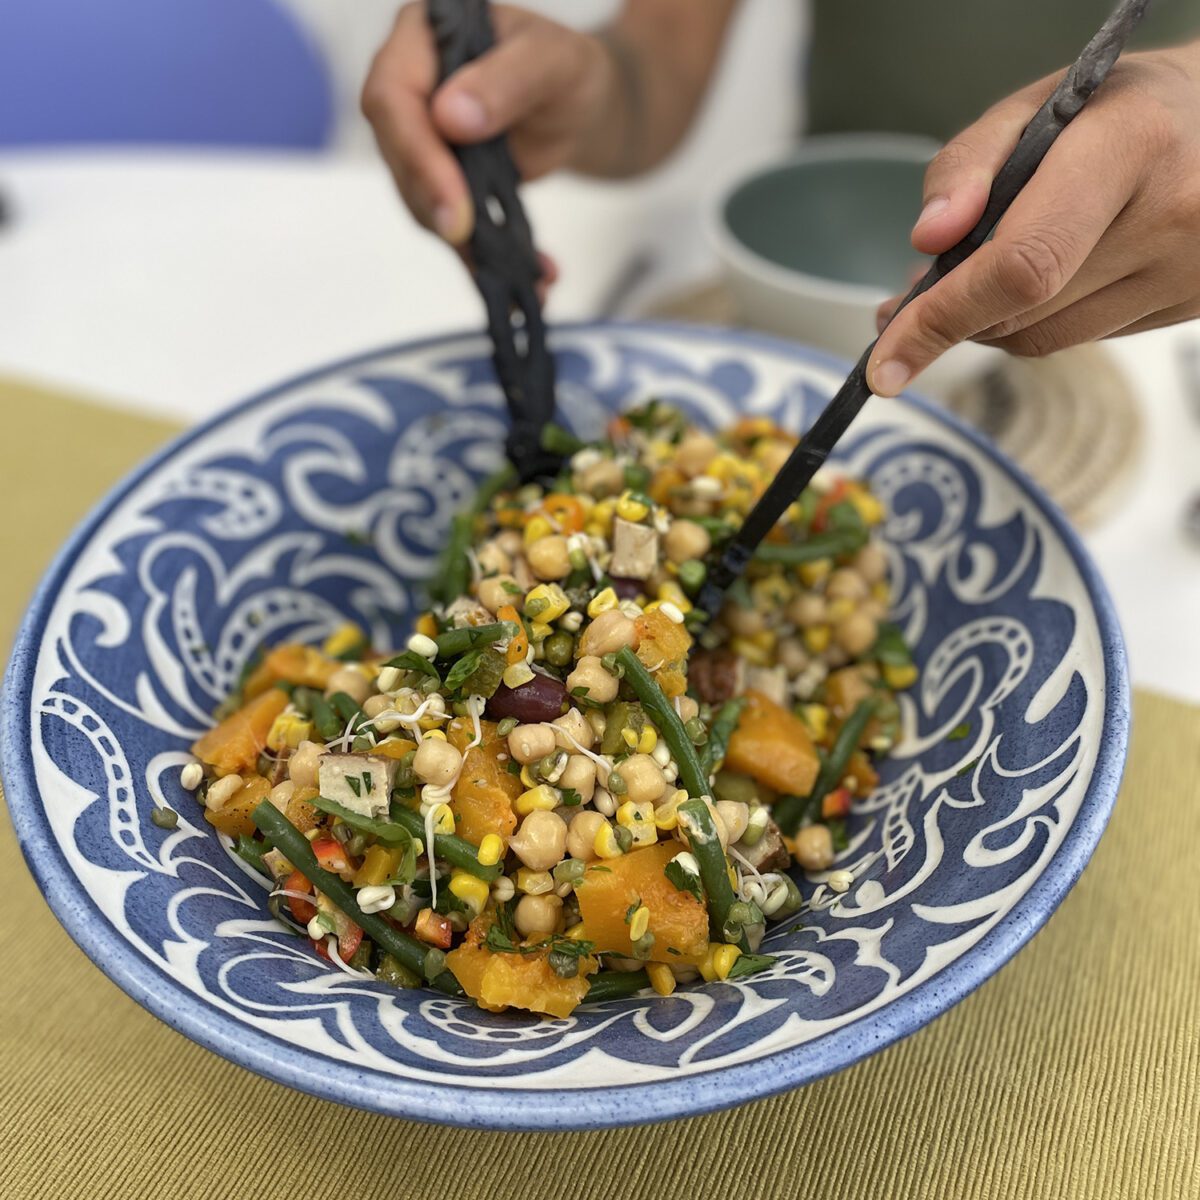 Two hands use wooden salad servers to serve an autumn bounty salad with sweetcorn and butternut squash